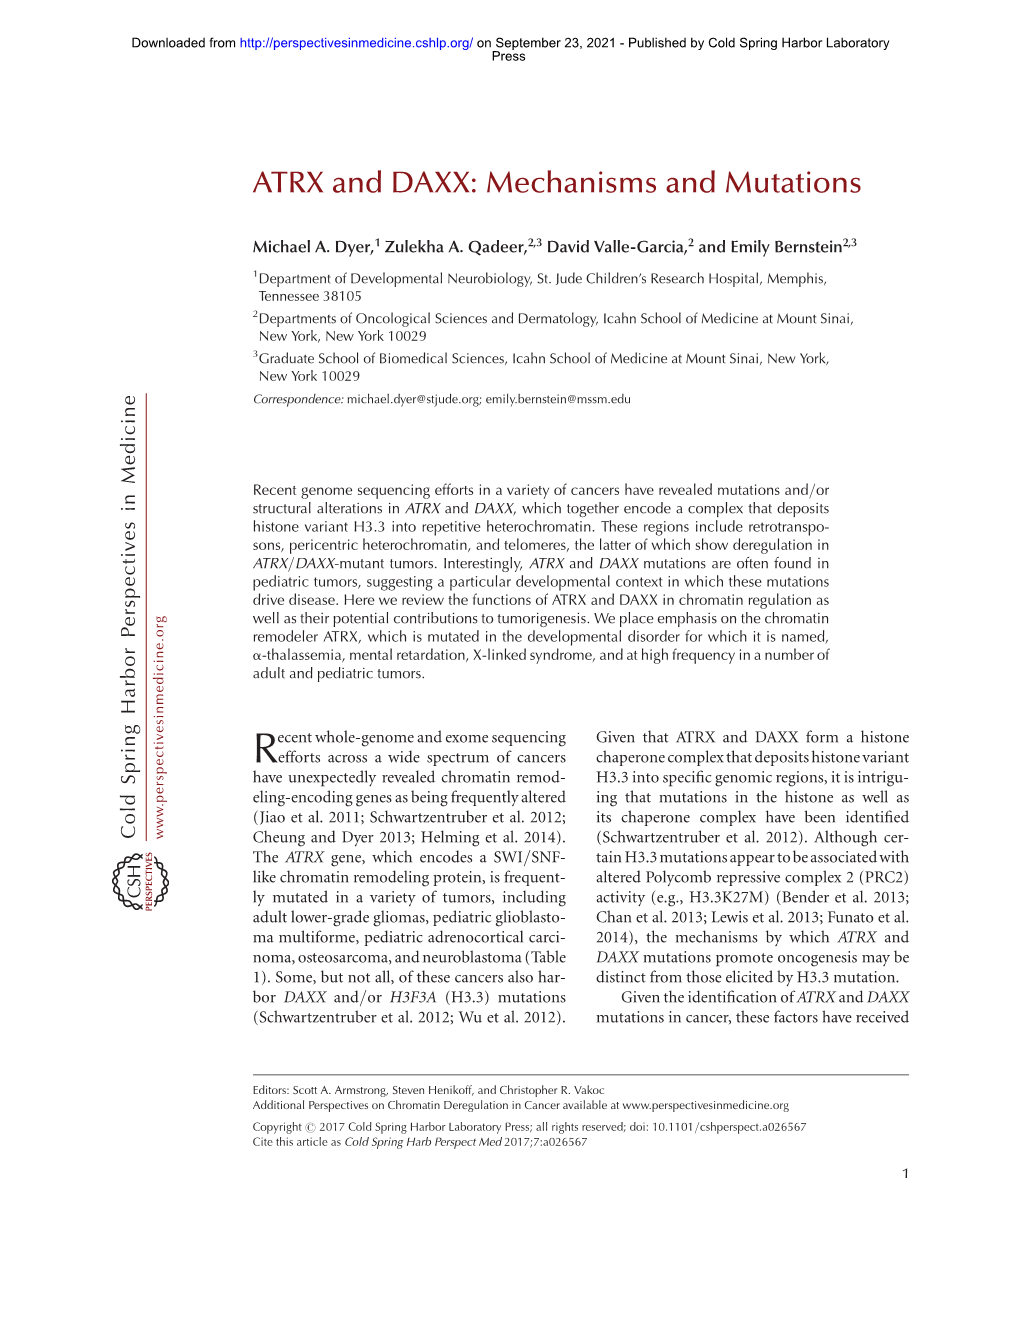 ATRX and DAXX: Mechanisms and Mutations